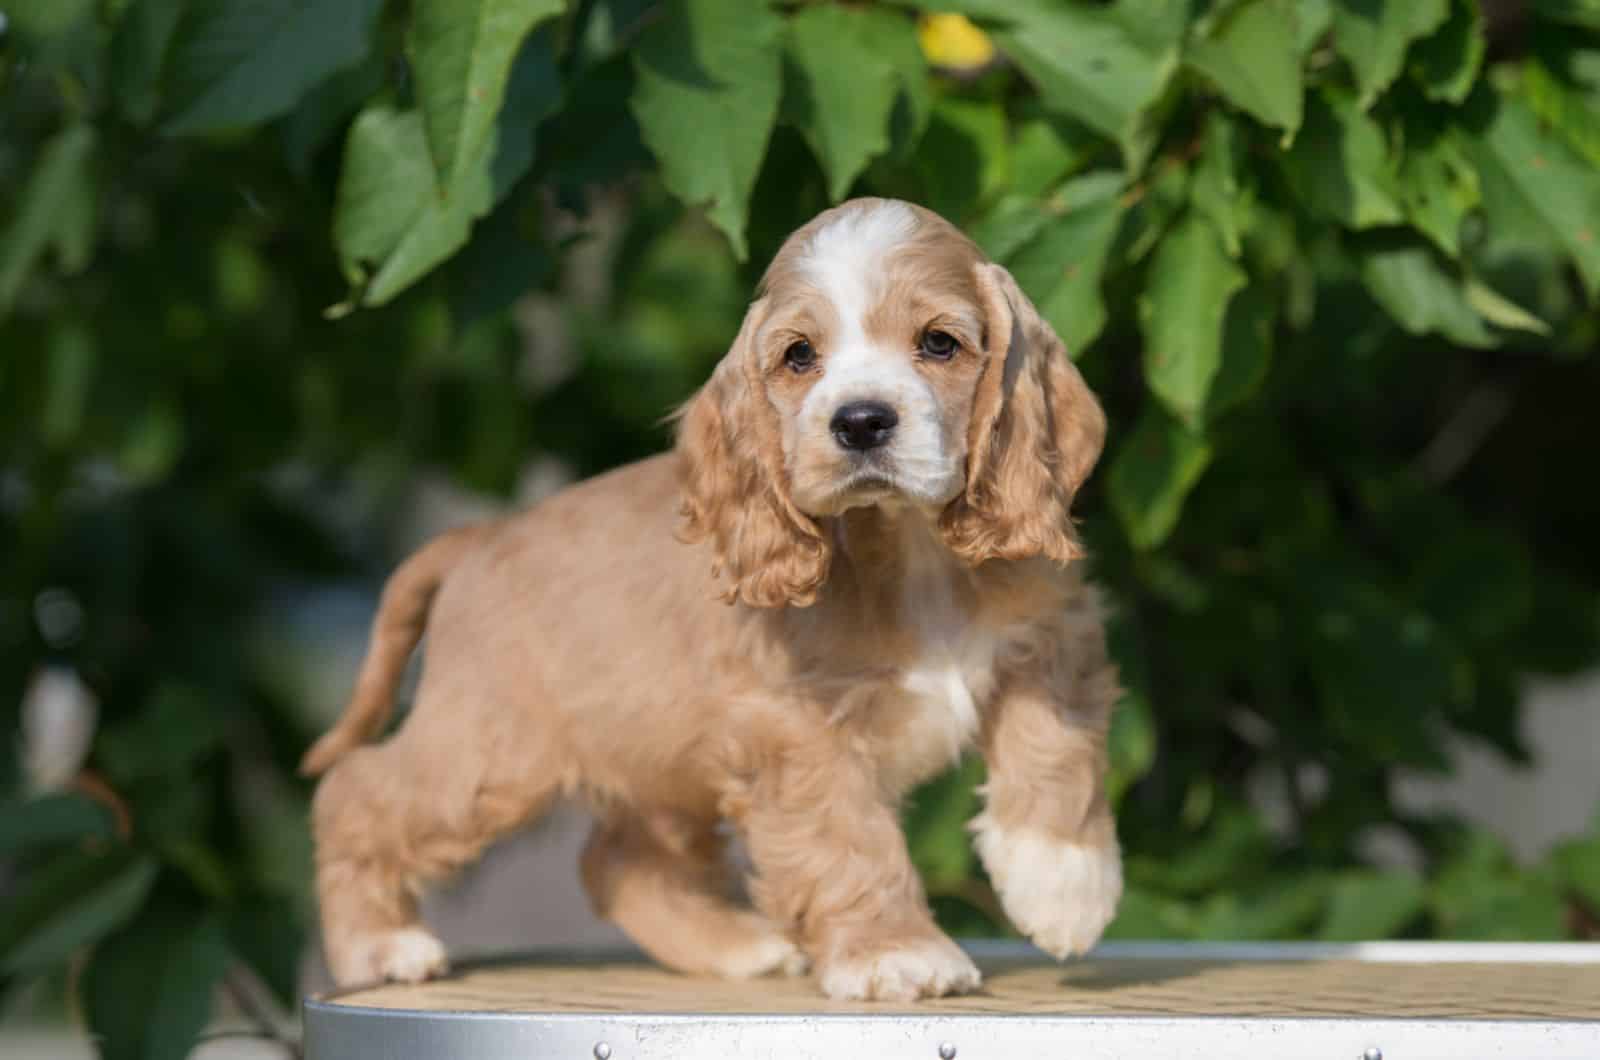 cocker spaniel puppy standign on a table in the garden